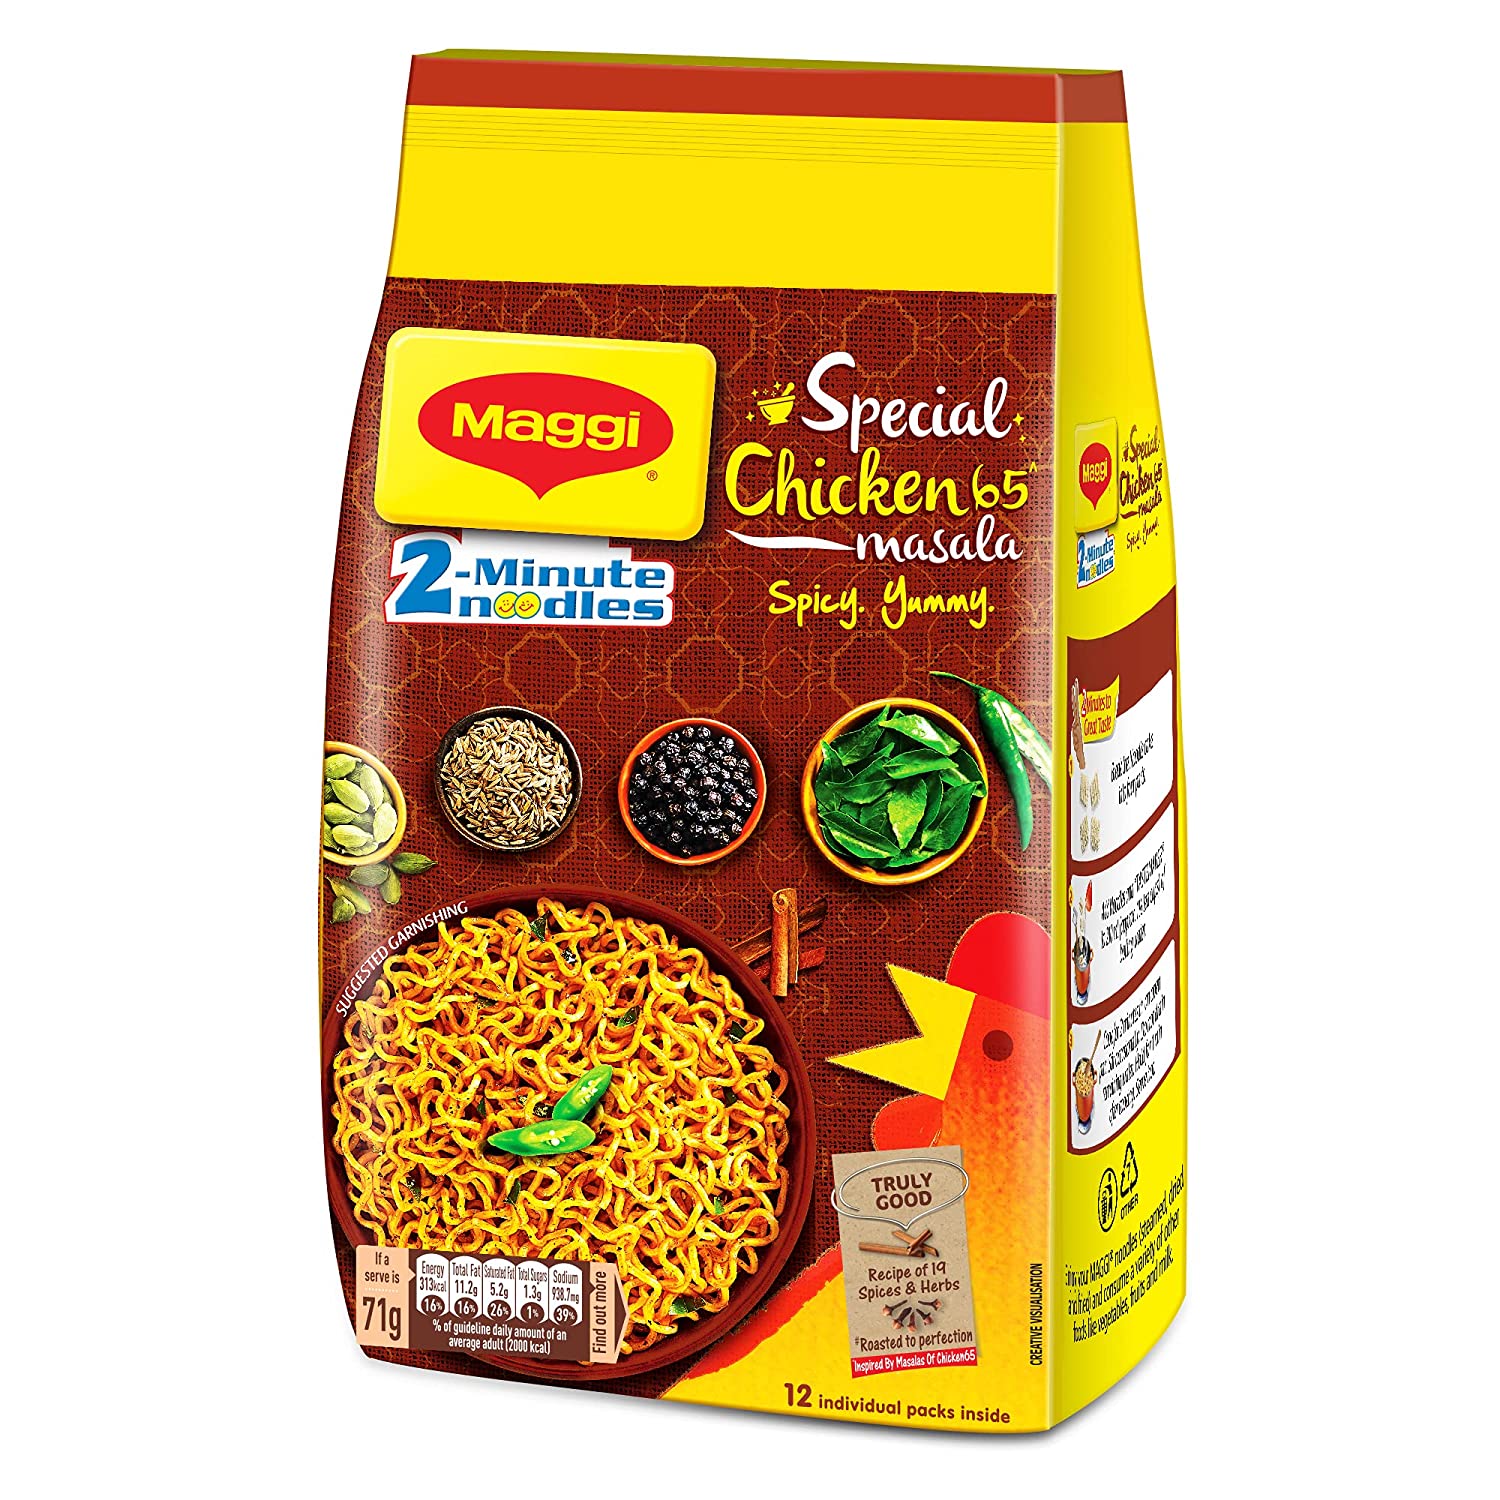 Maggi 2 Minute Instant Noodles Special Chicke65 Masala Image